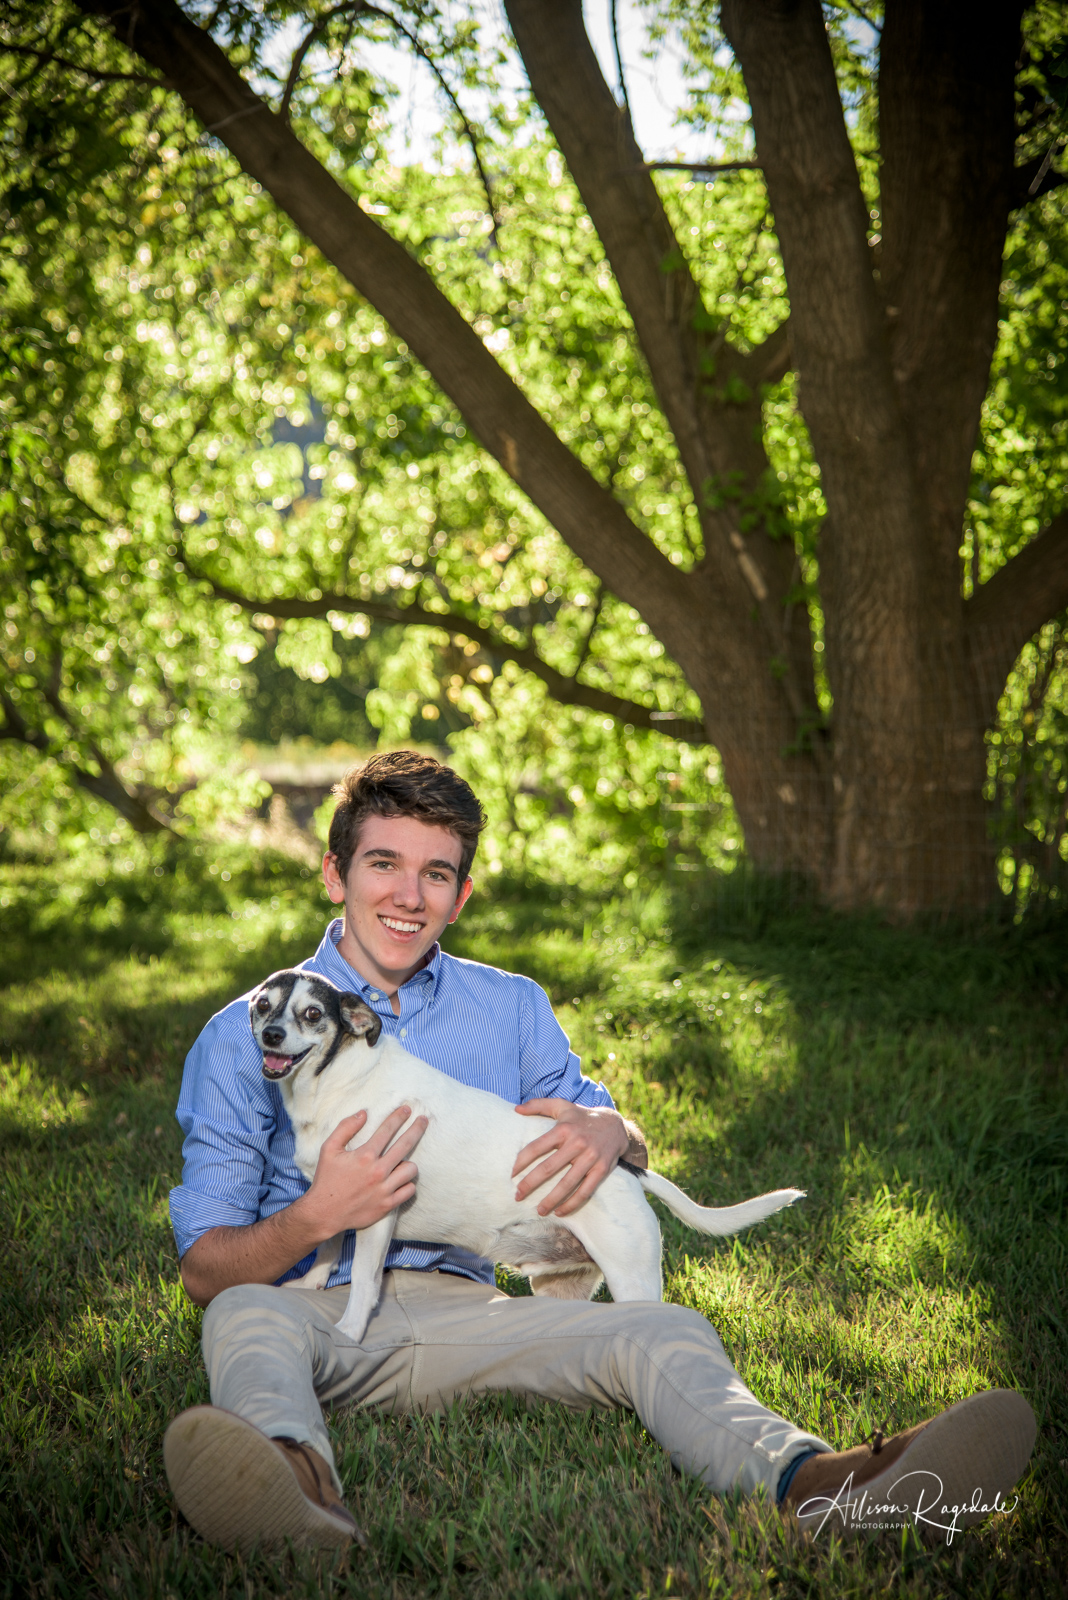 Senior Picture Idea With Dogs